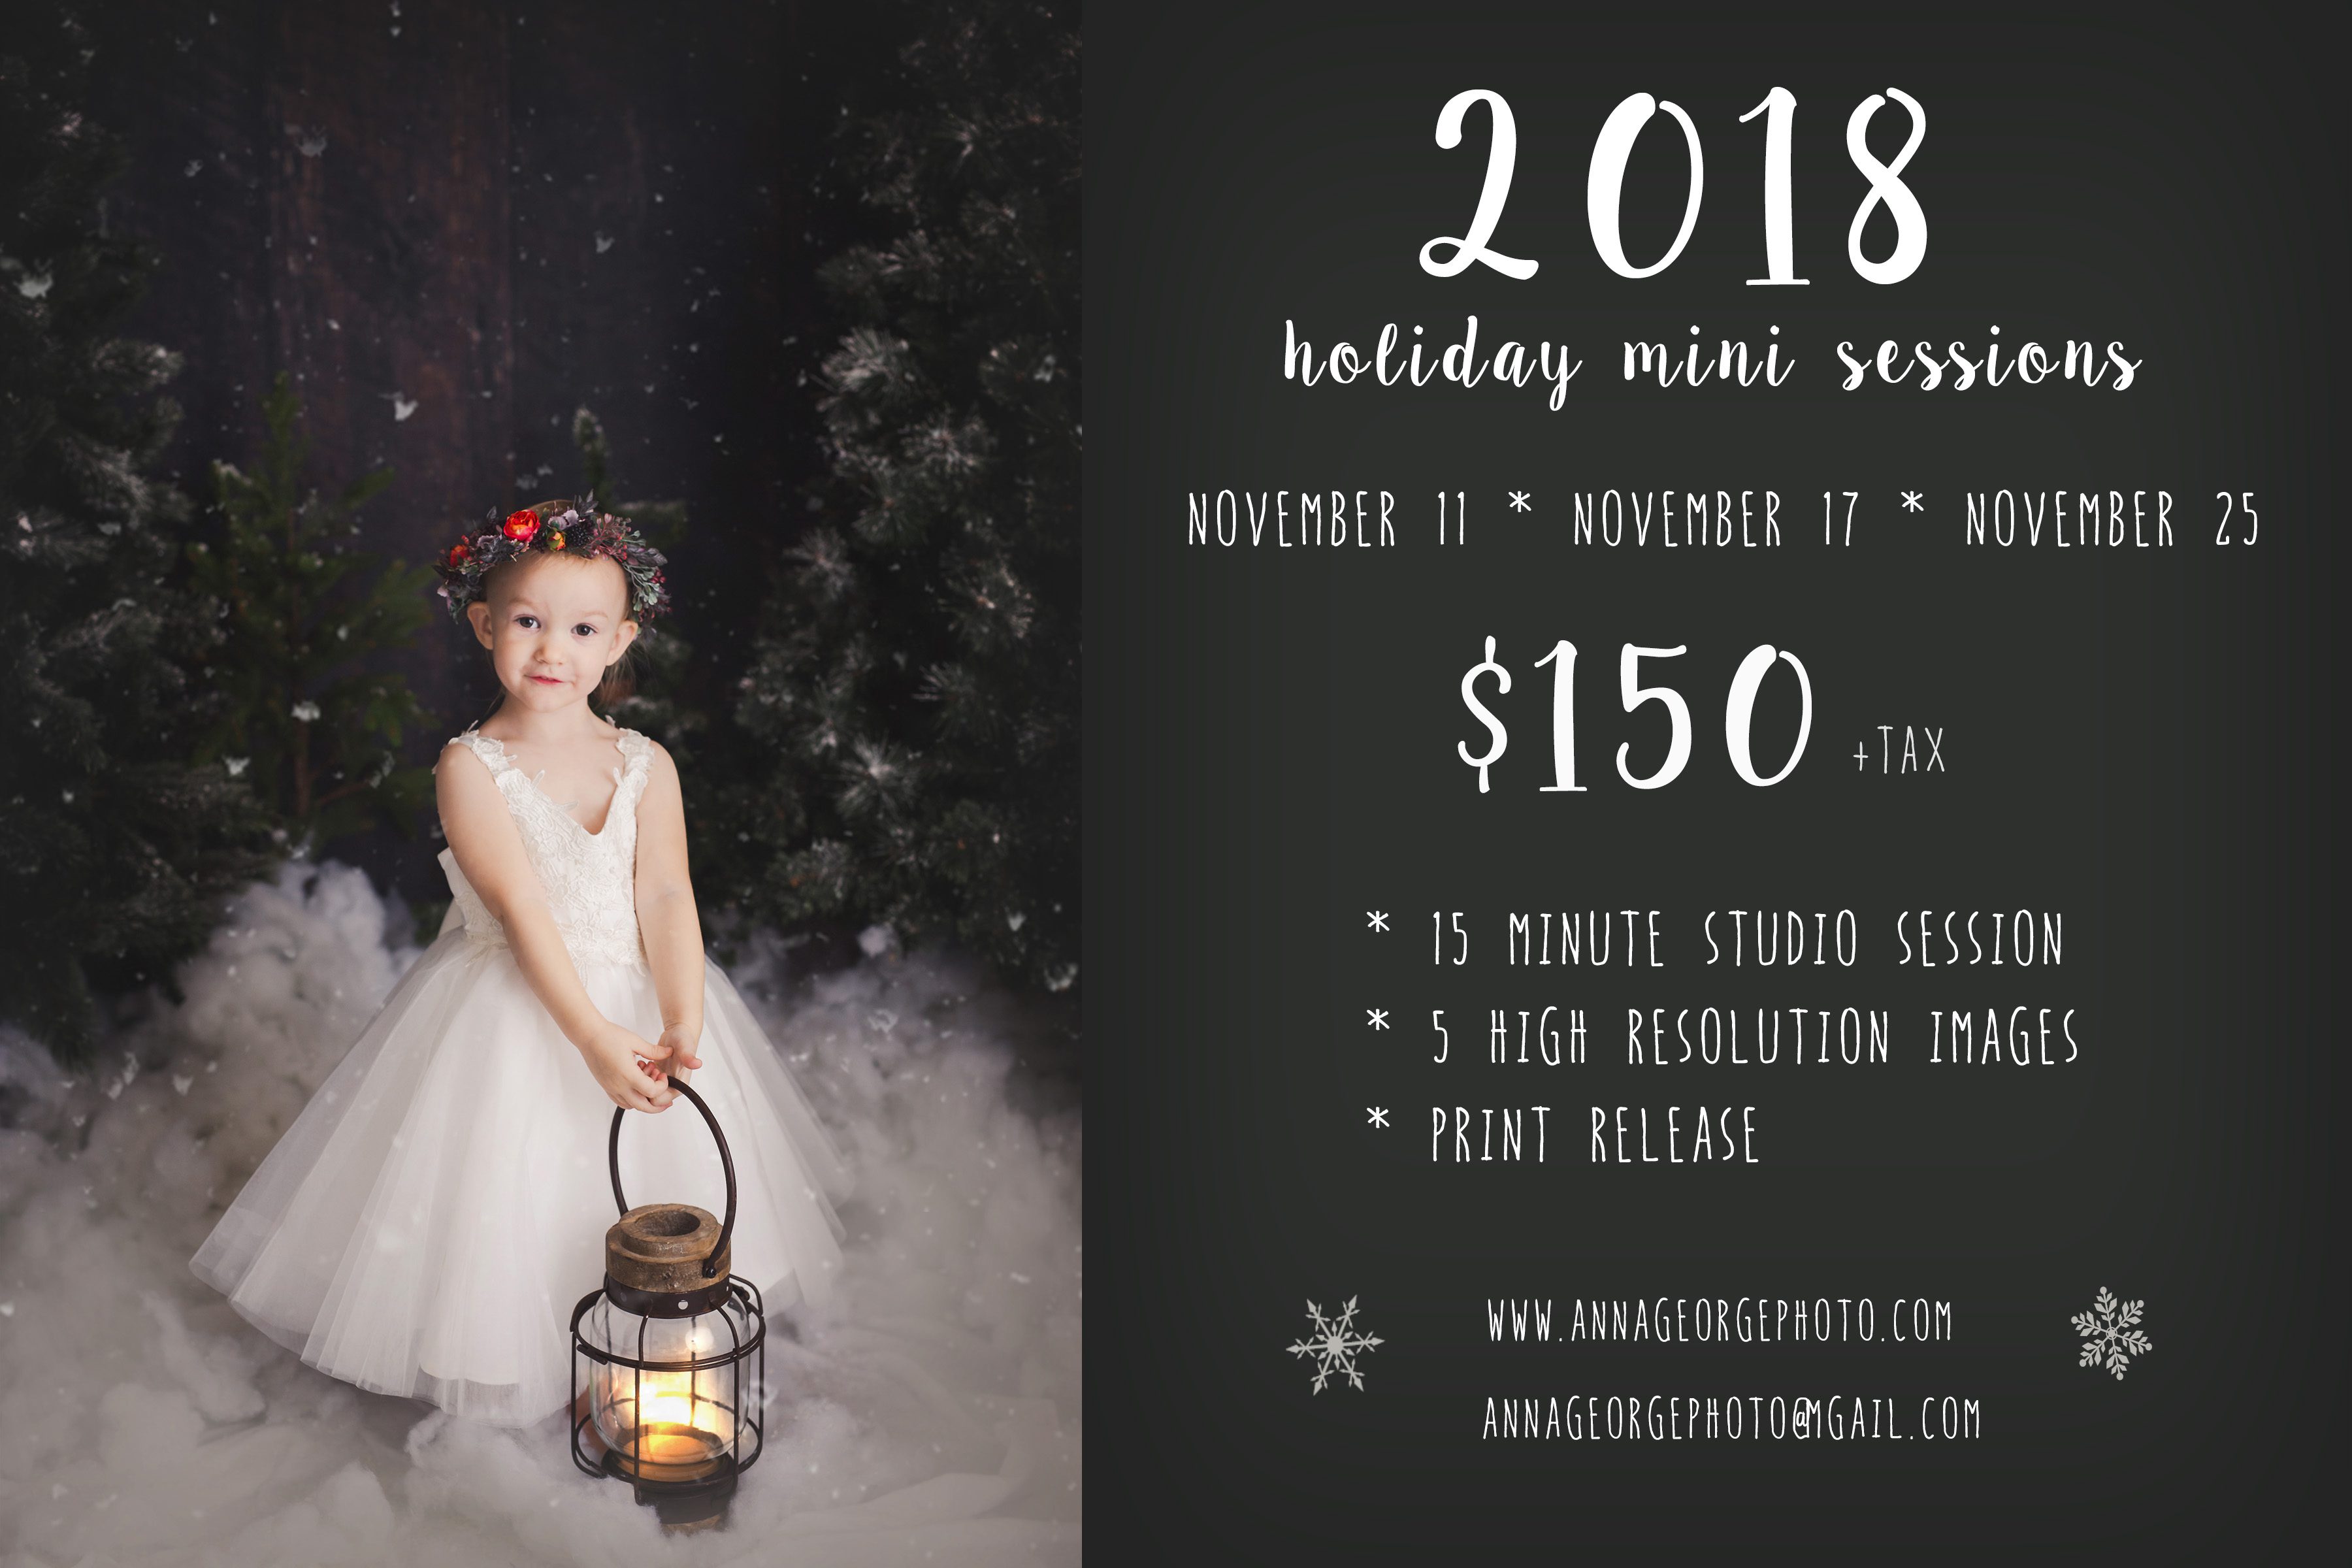 Anna George Photography - www.annageorgephoto.com - 2018 christmas mini sessions